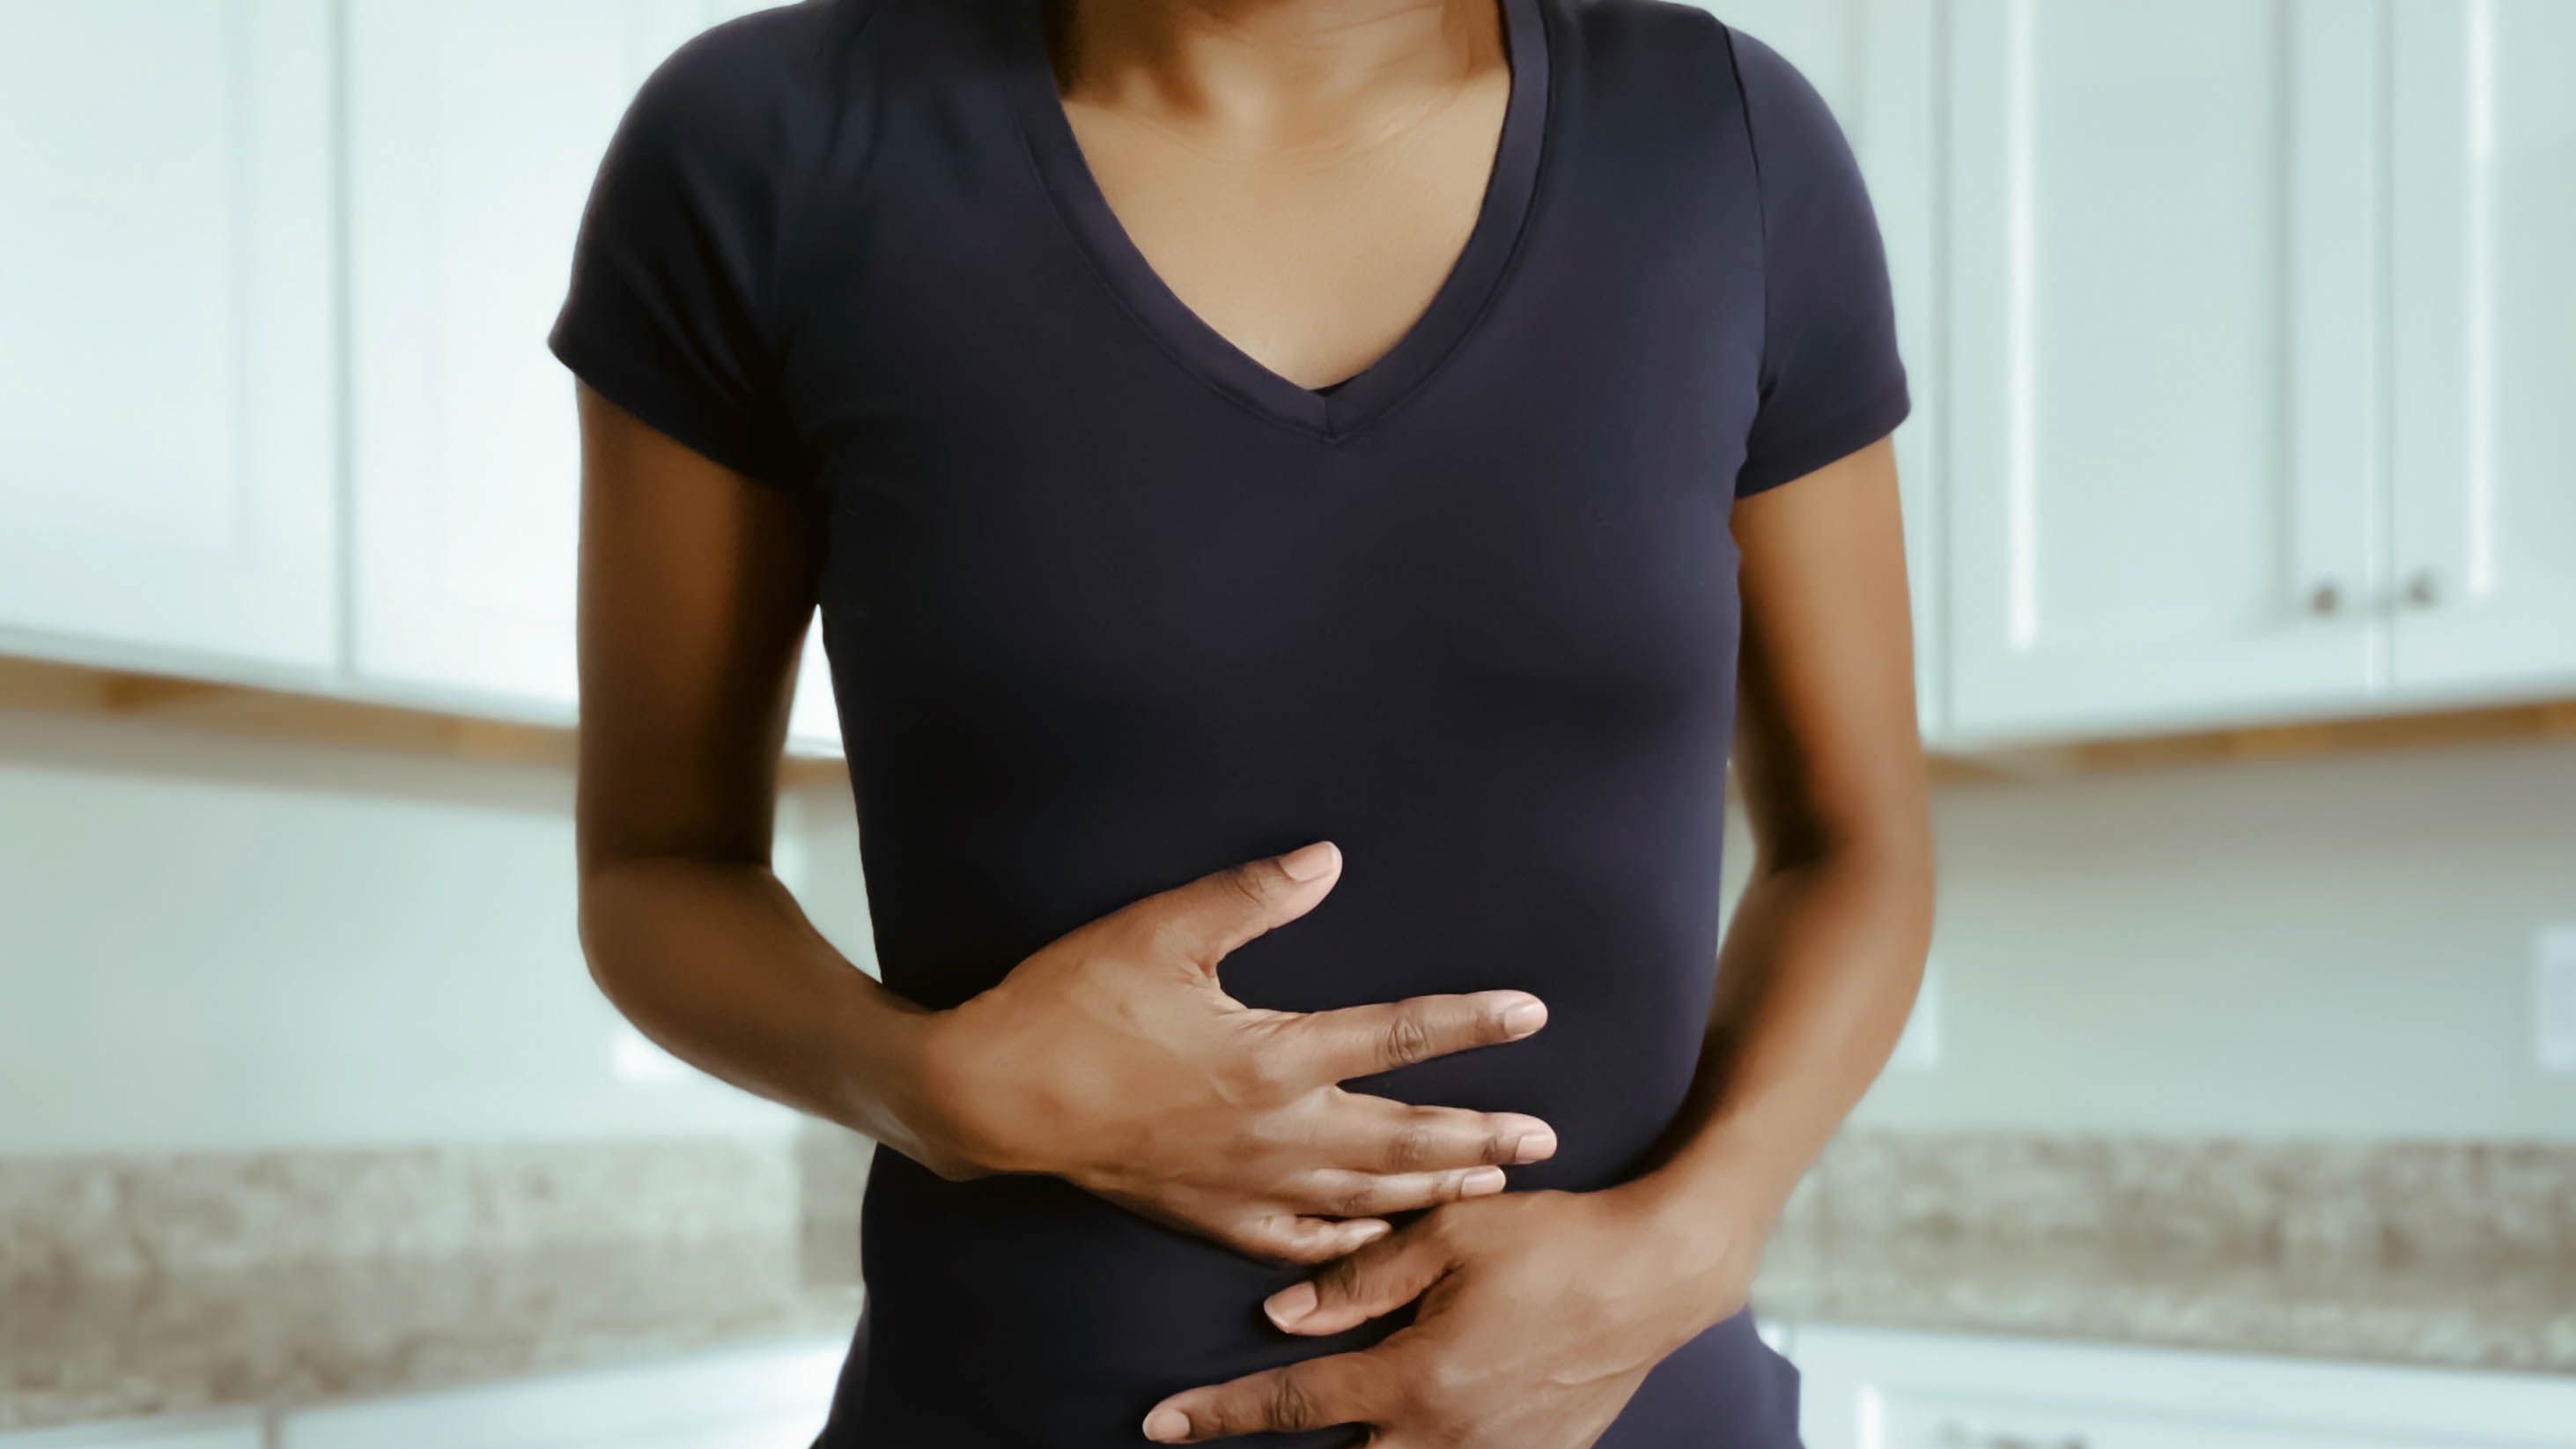 5 Common Causes of Bloating and How to Find Relief